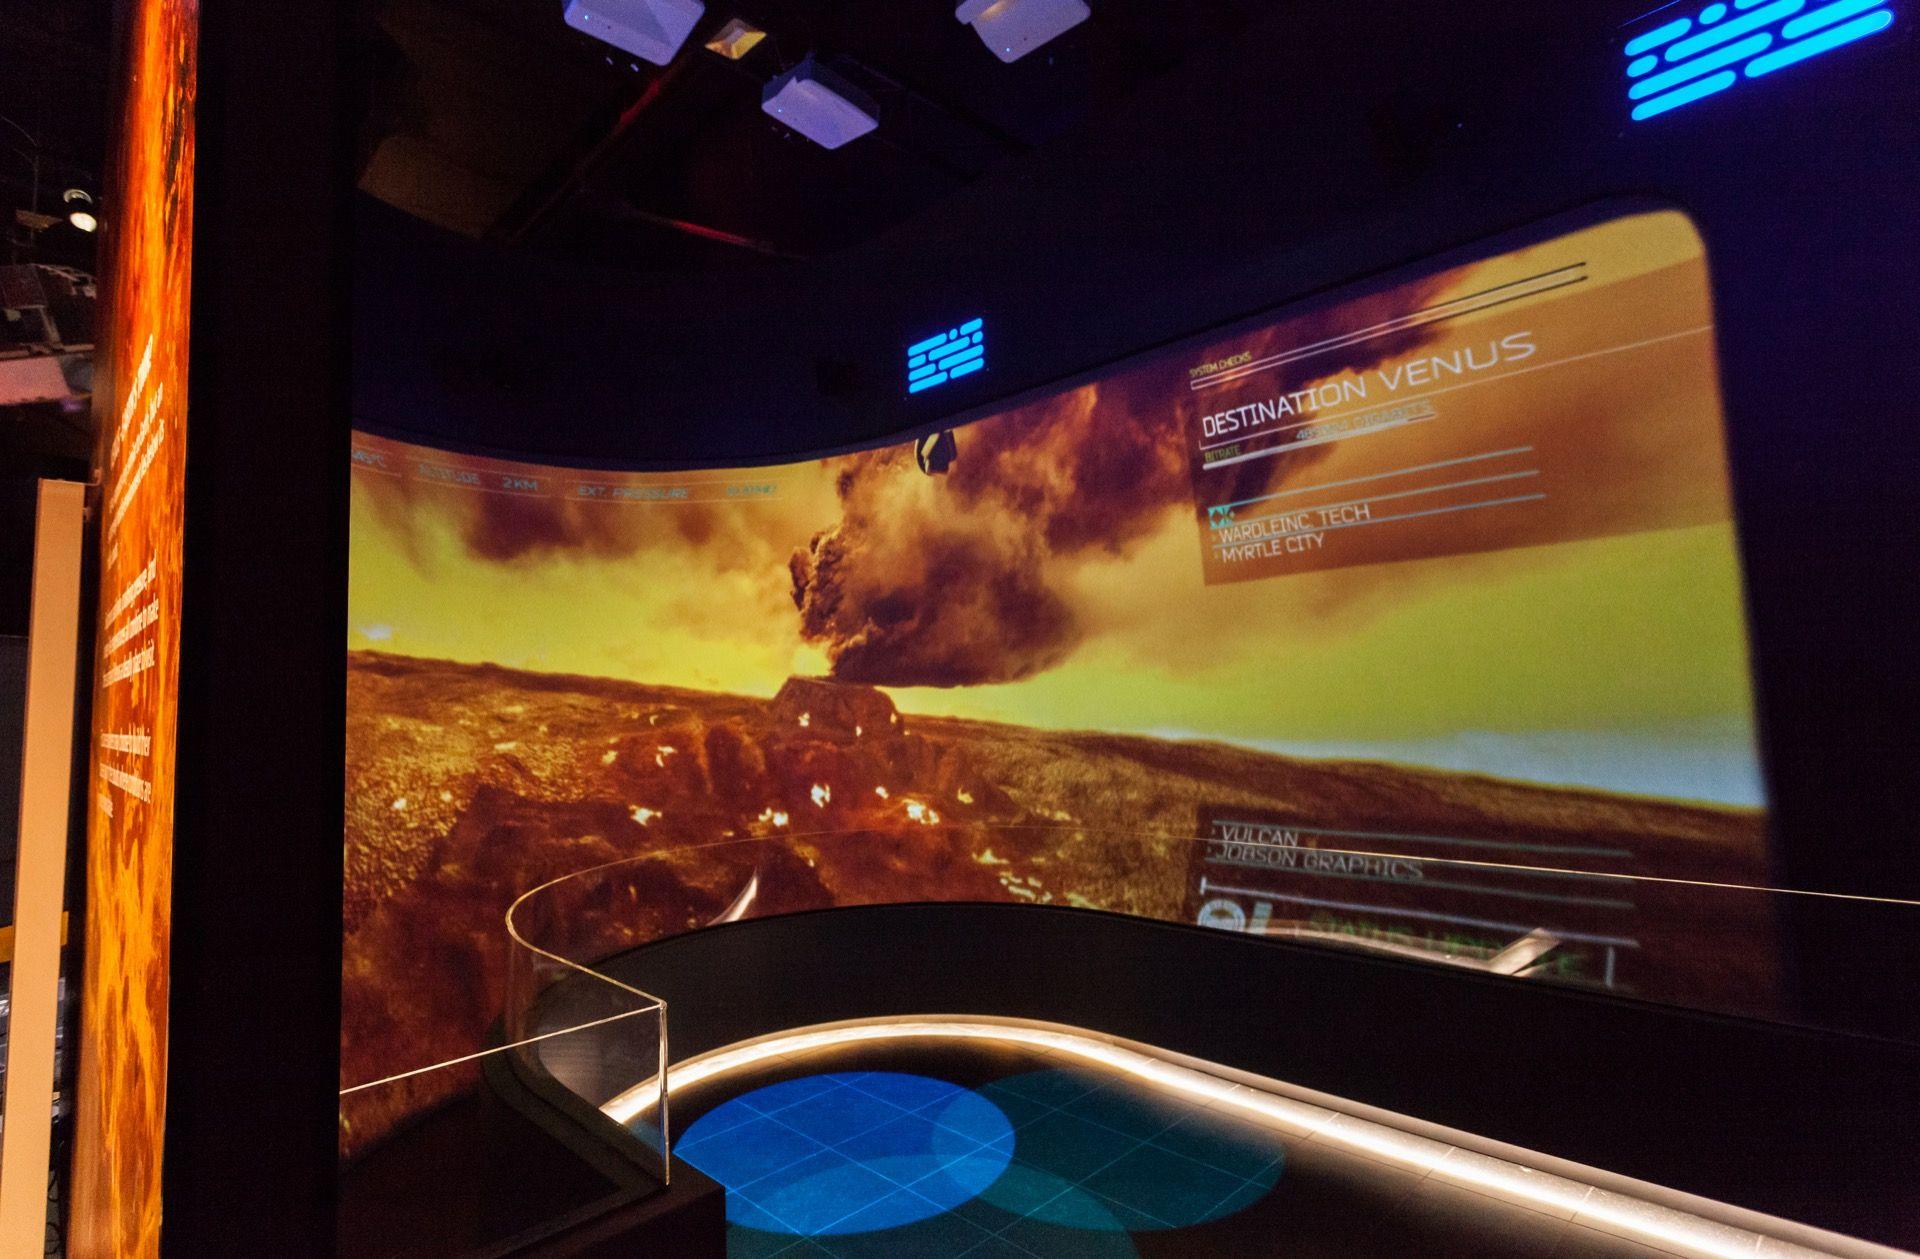 Inside the CAVE-like immersive environment of the “Destination Venus” exhibit at the National Space Centre